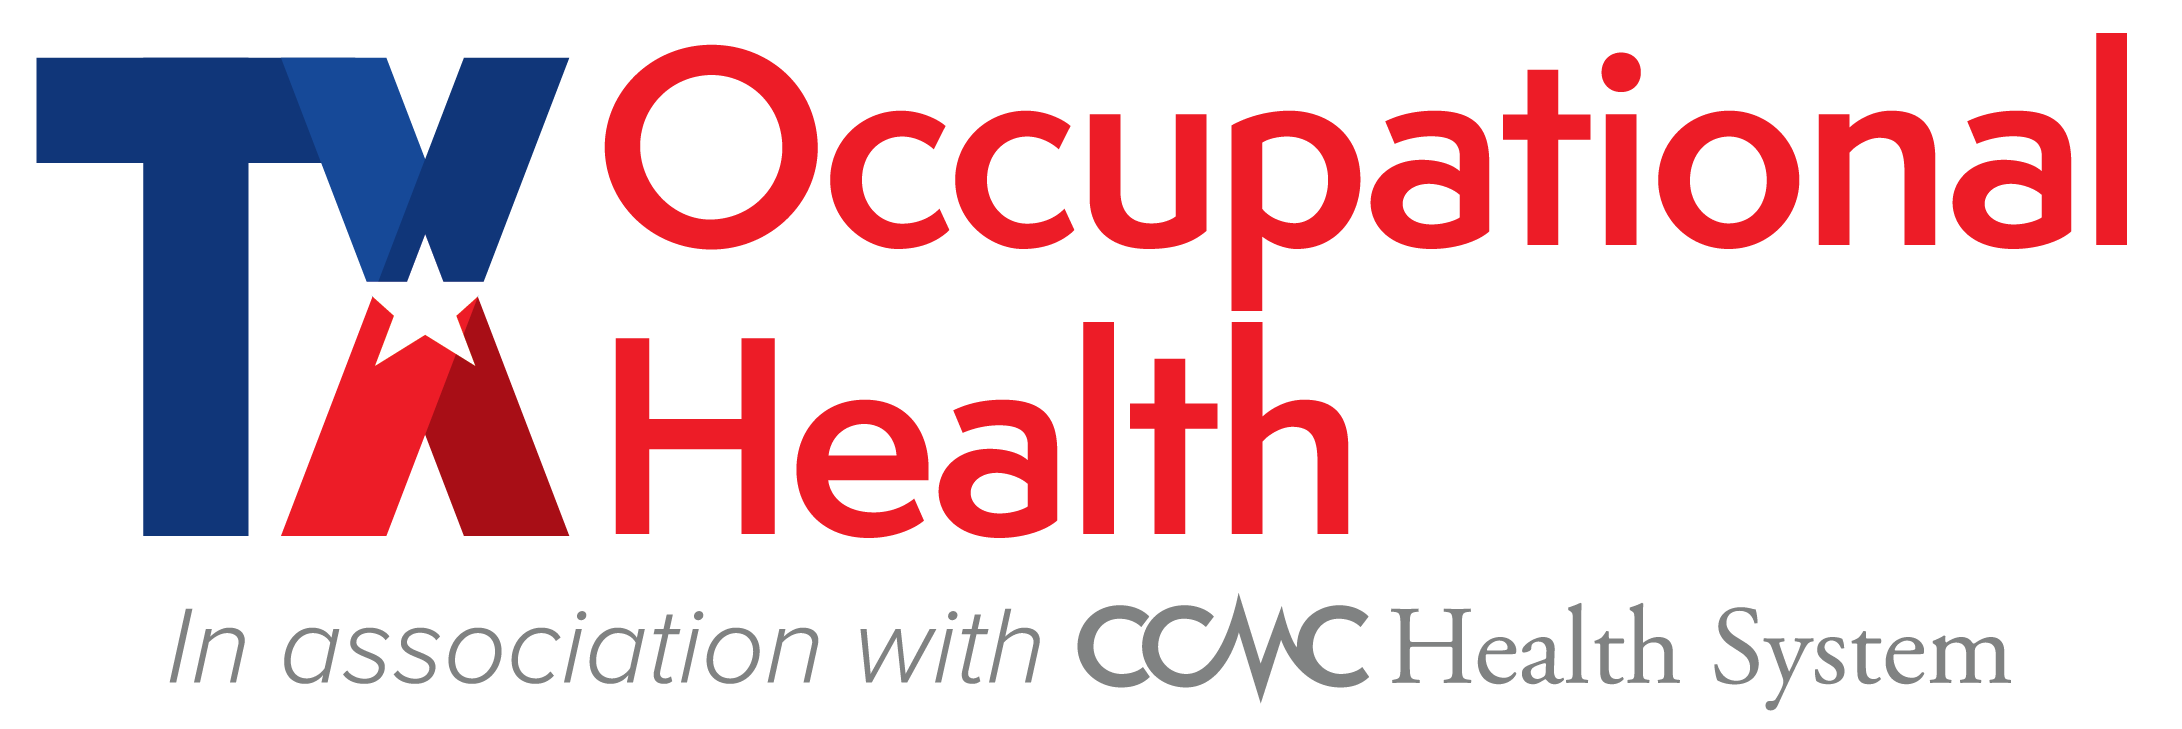 TX Occupational Health - In association with CCMC Health System Logo